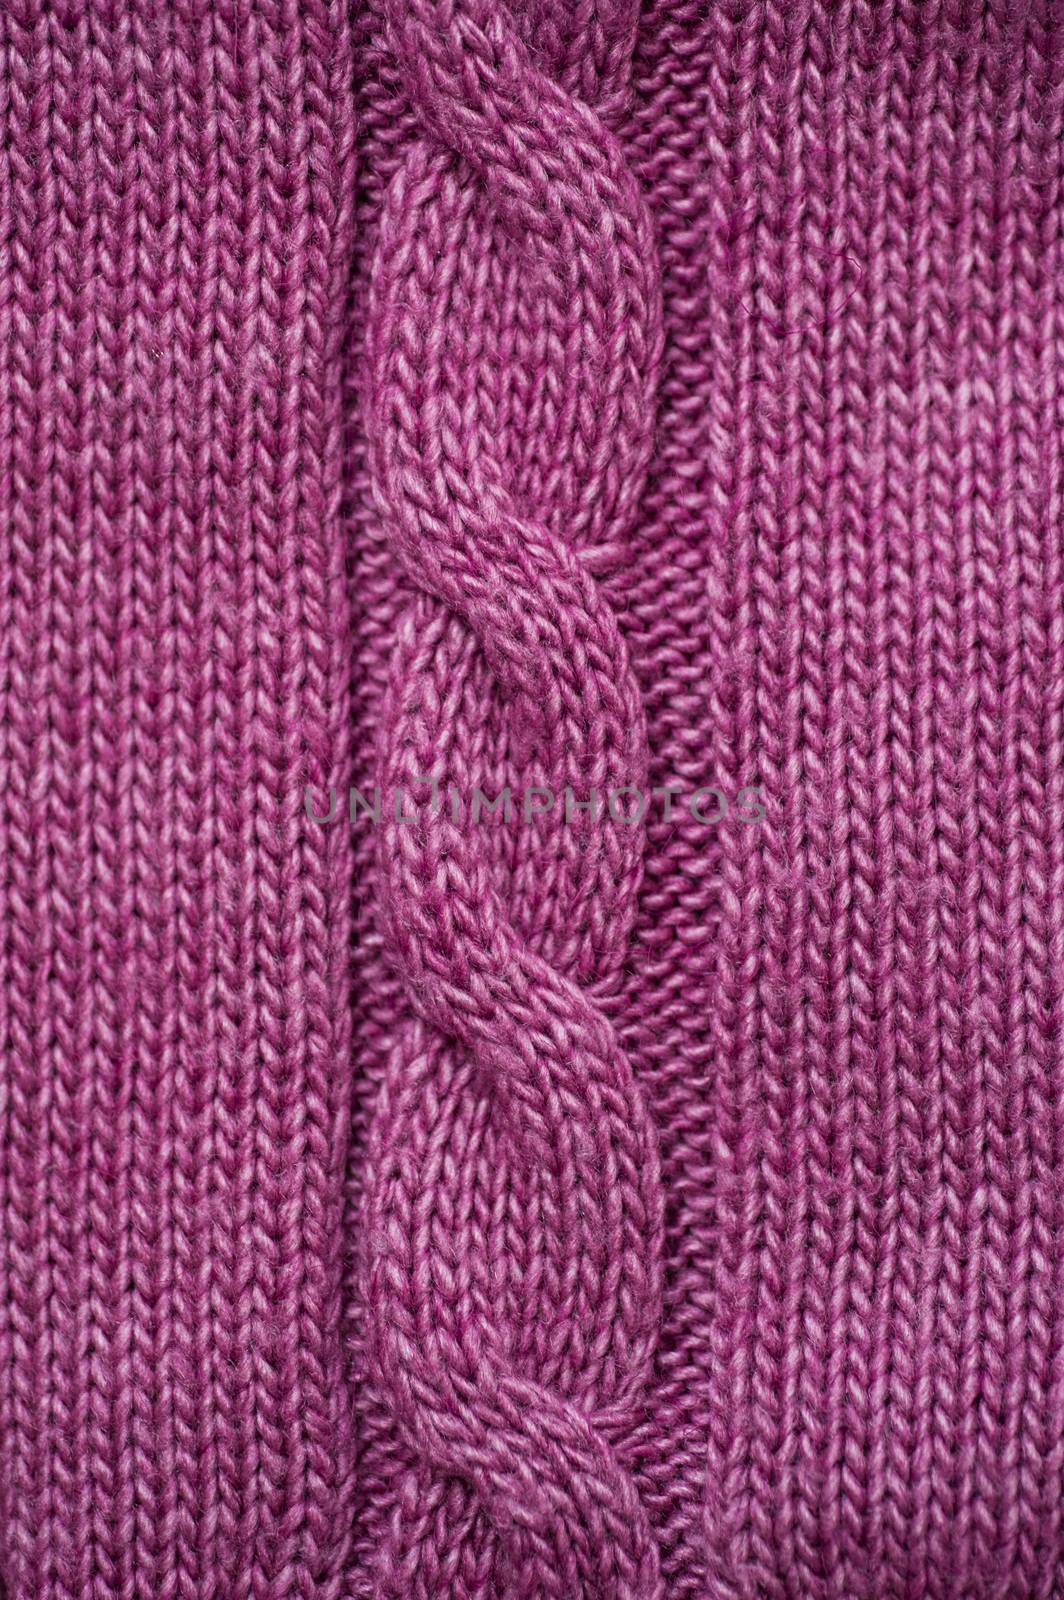 texture of lilac knitted fabric for the background by timonko